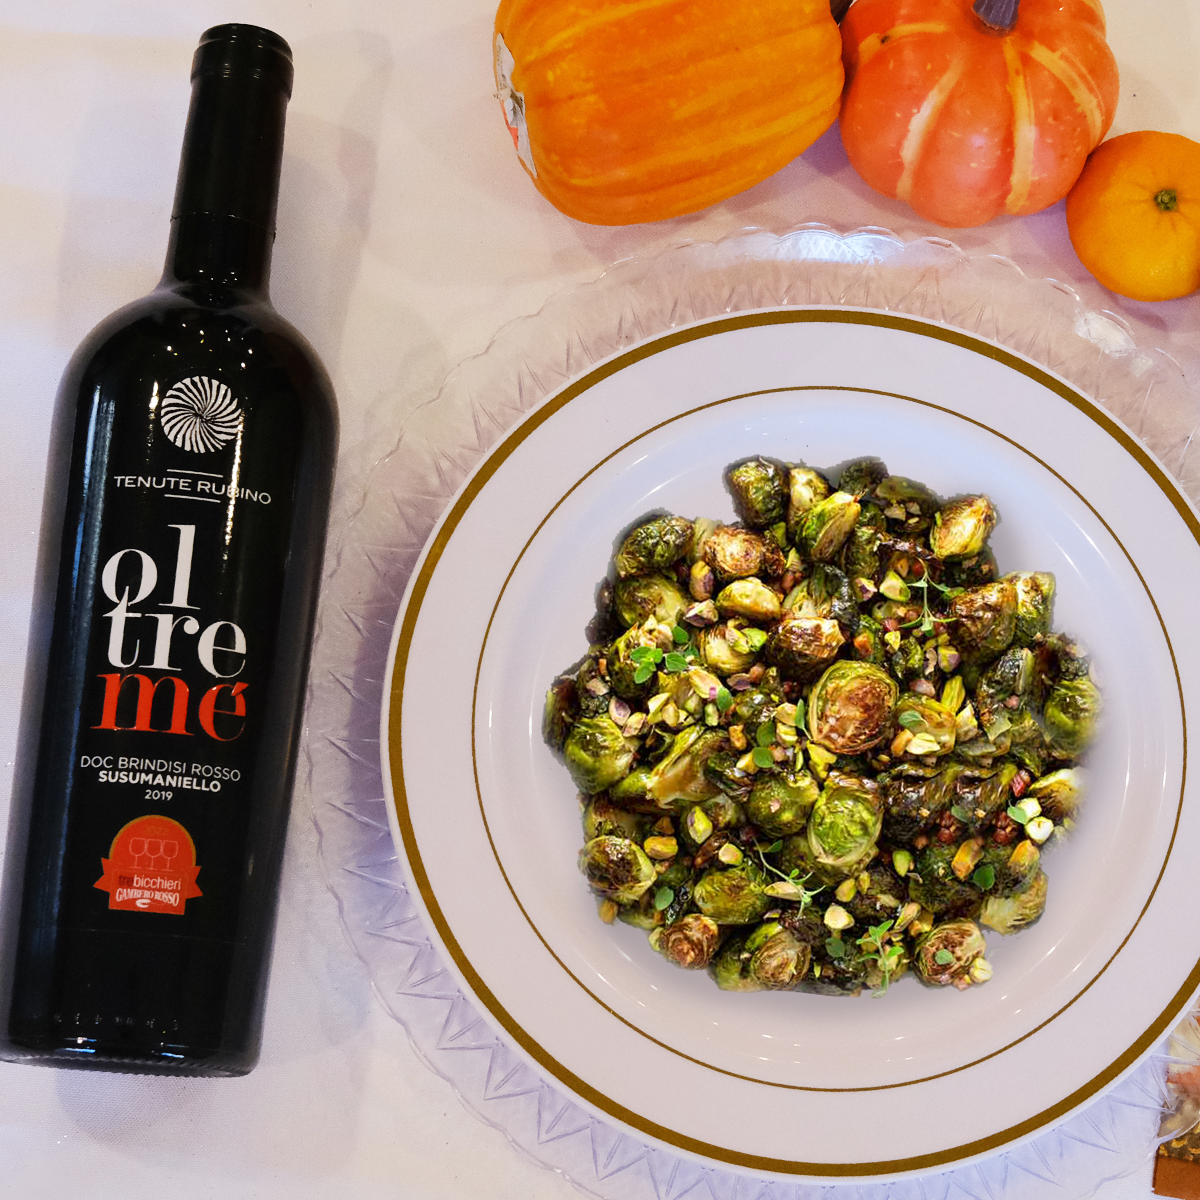 Italian Brussels Sprouts + Oltreme' Rosso DOC Brindisi Rosso Susumaniello